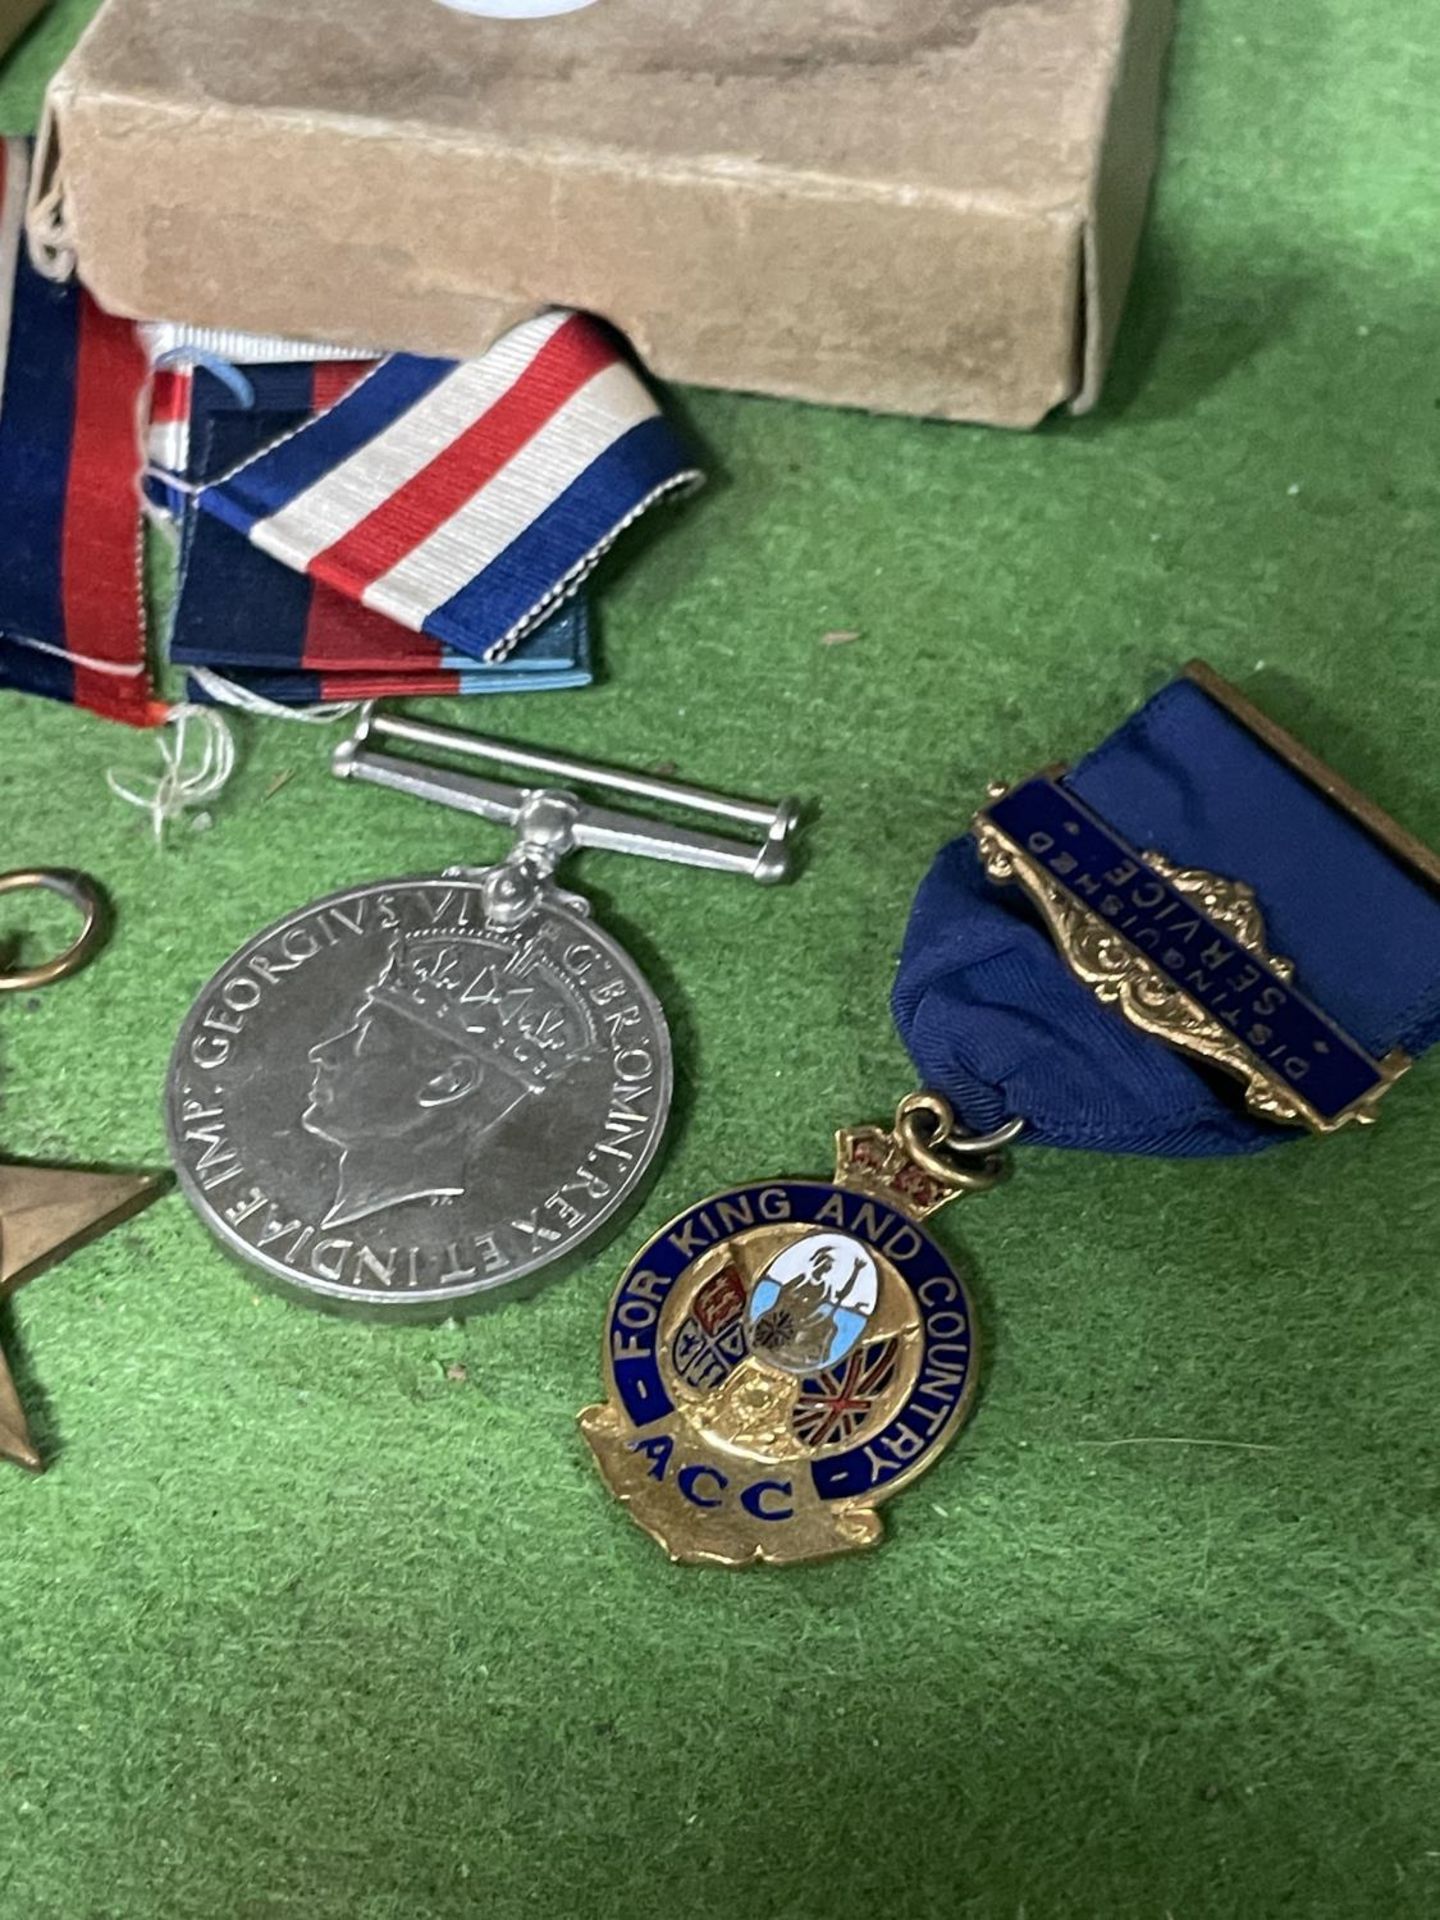 WORLD WAR II MEDALS, 1939-45 STAR, FRANCE AND GERMANY STAR 1939-45 MEDAL ETC. - Image 3 of 3